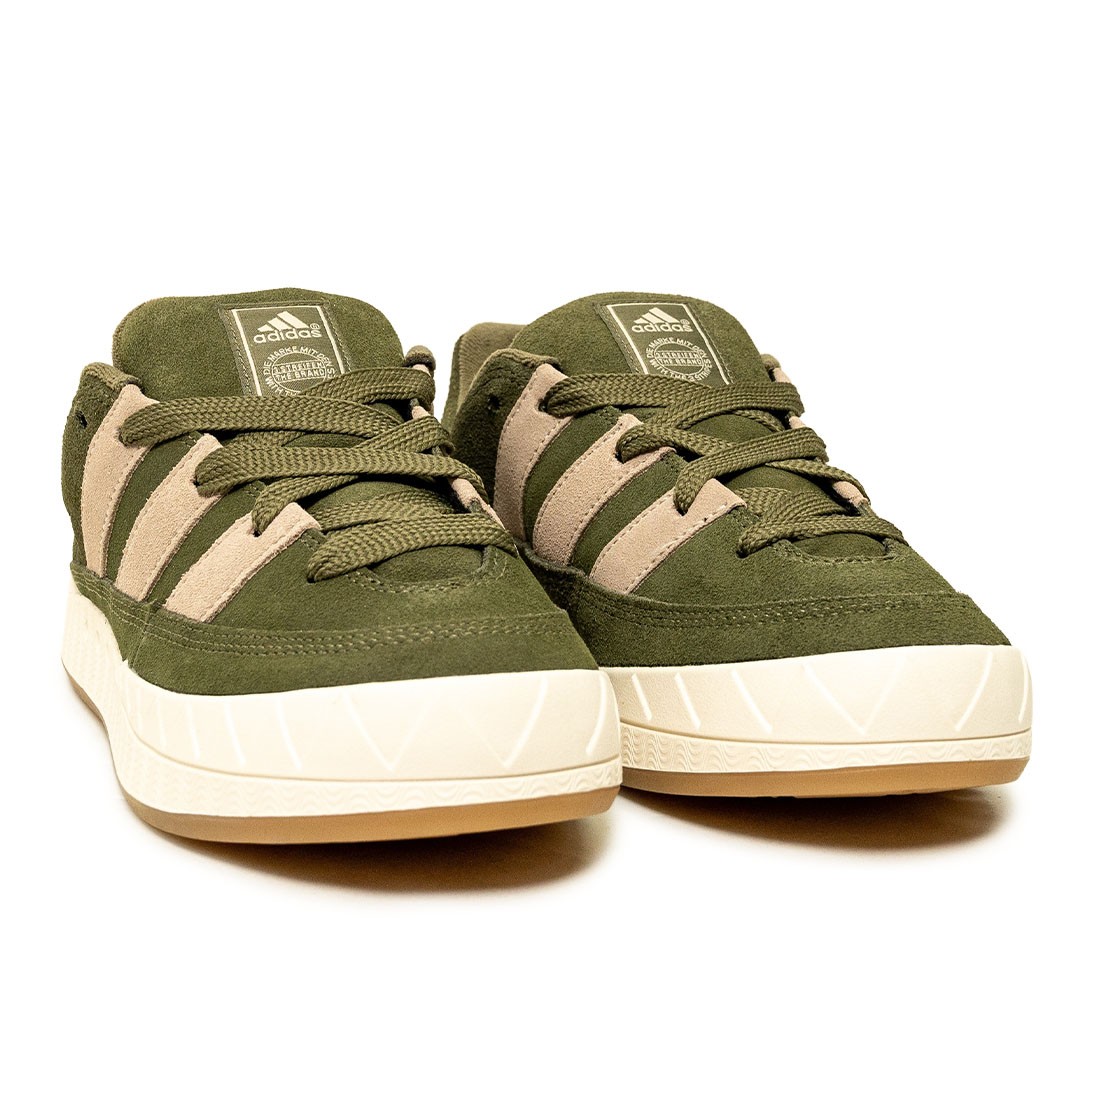 ADIDAS ADIMATIC OLIVE STRATA BEIGE OFF WHITE IE9864 – BLENDS